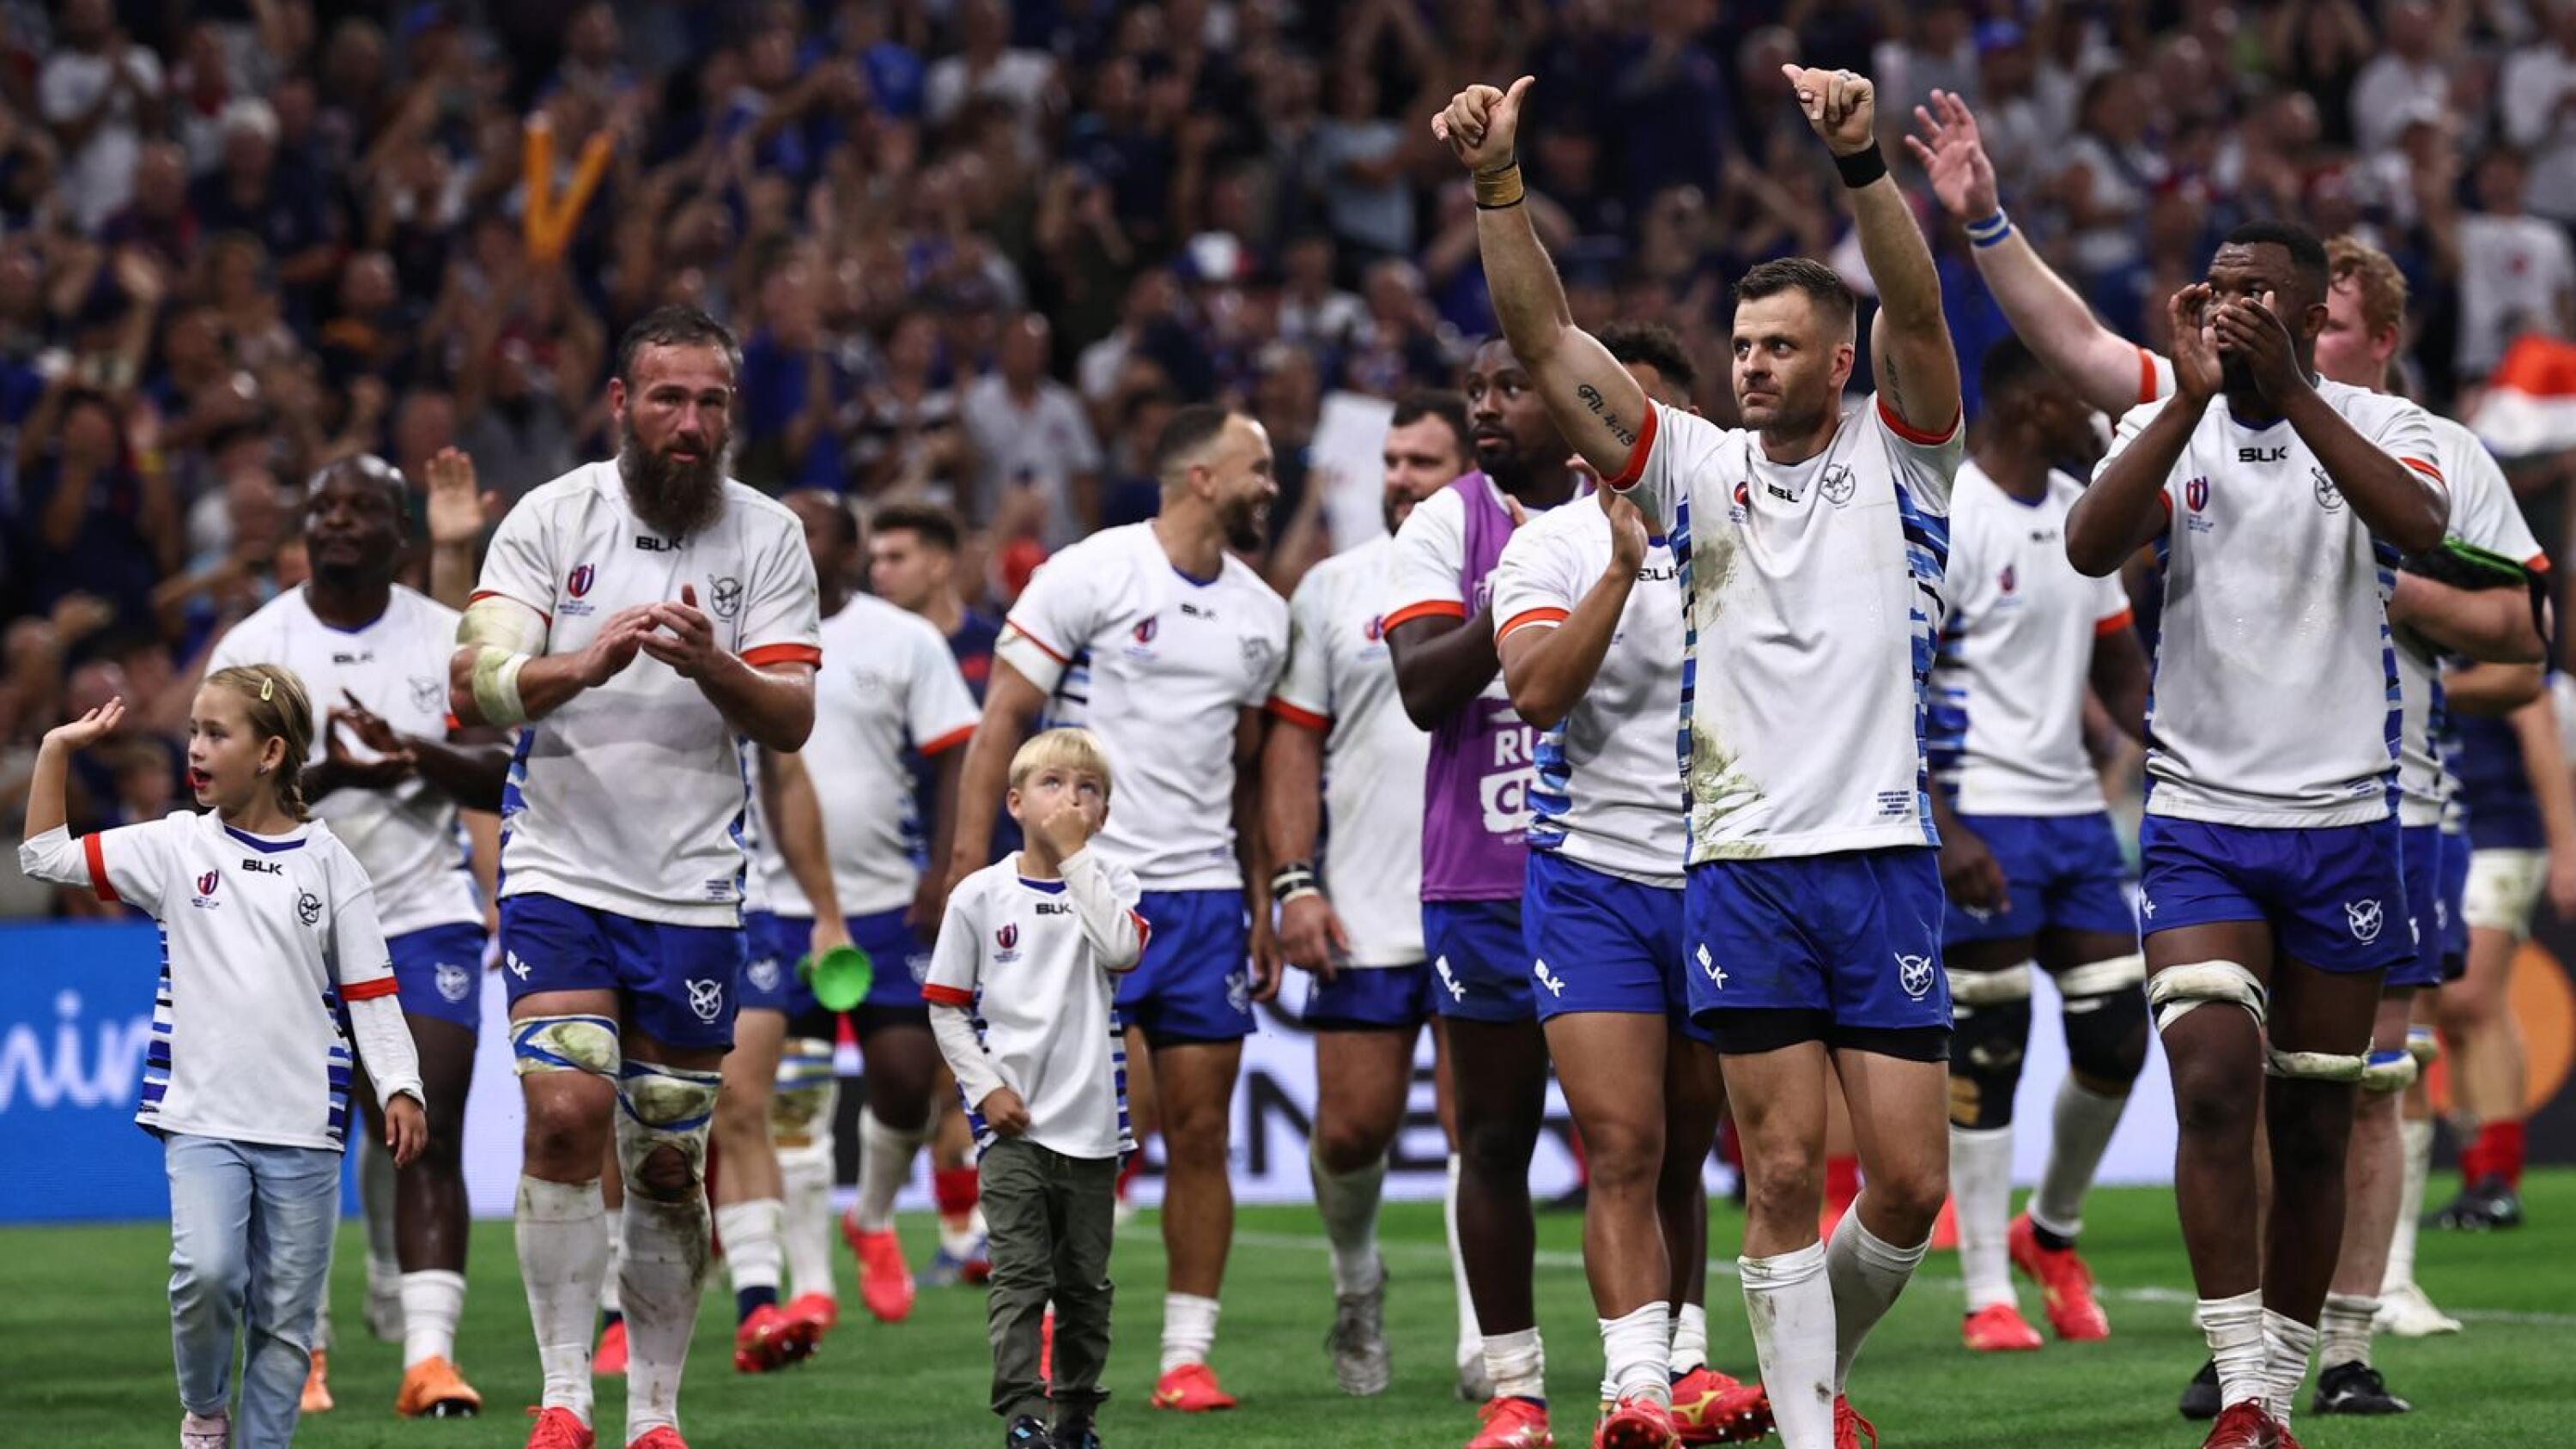 Namibia's players acknowledge the crowd at the end of the France 2023 Rugby World Cup Pool A match between France and Namibia at the Stade de Velodrome in Marseille, southern France